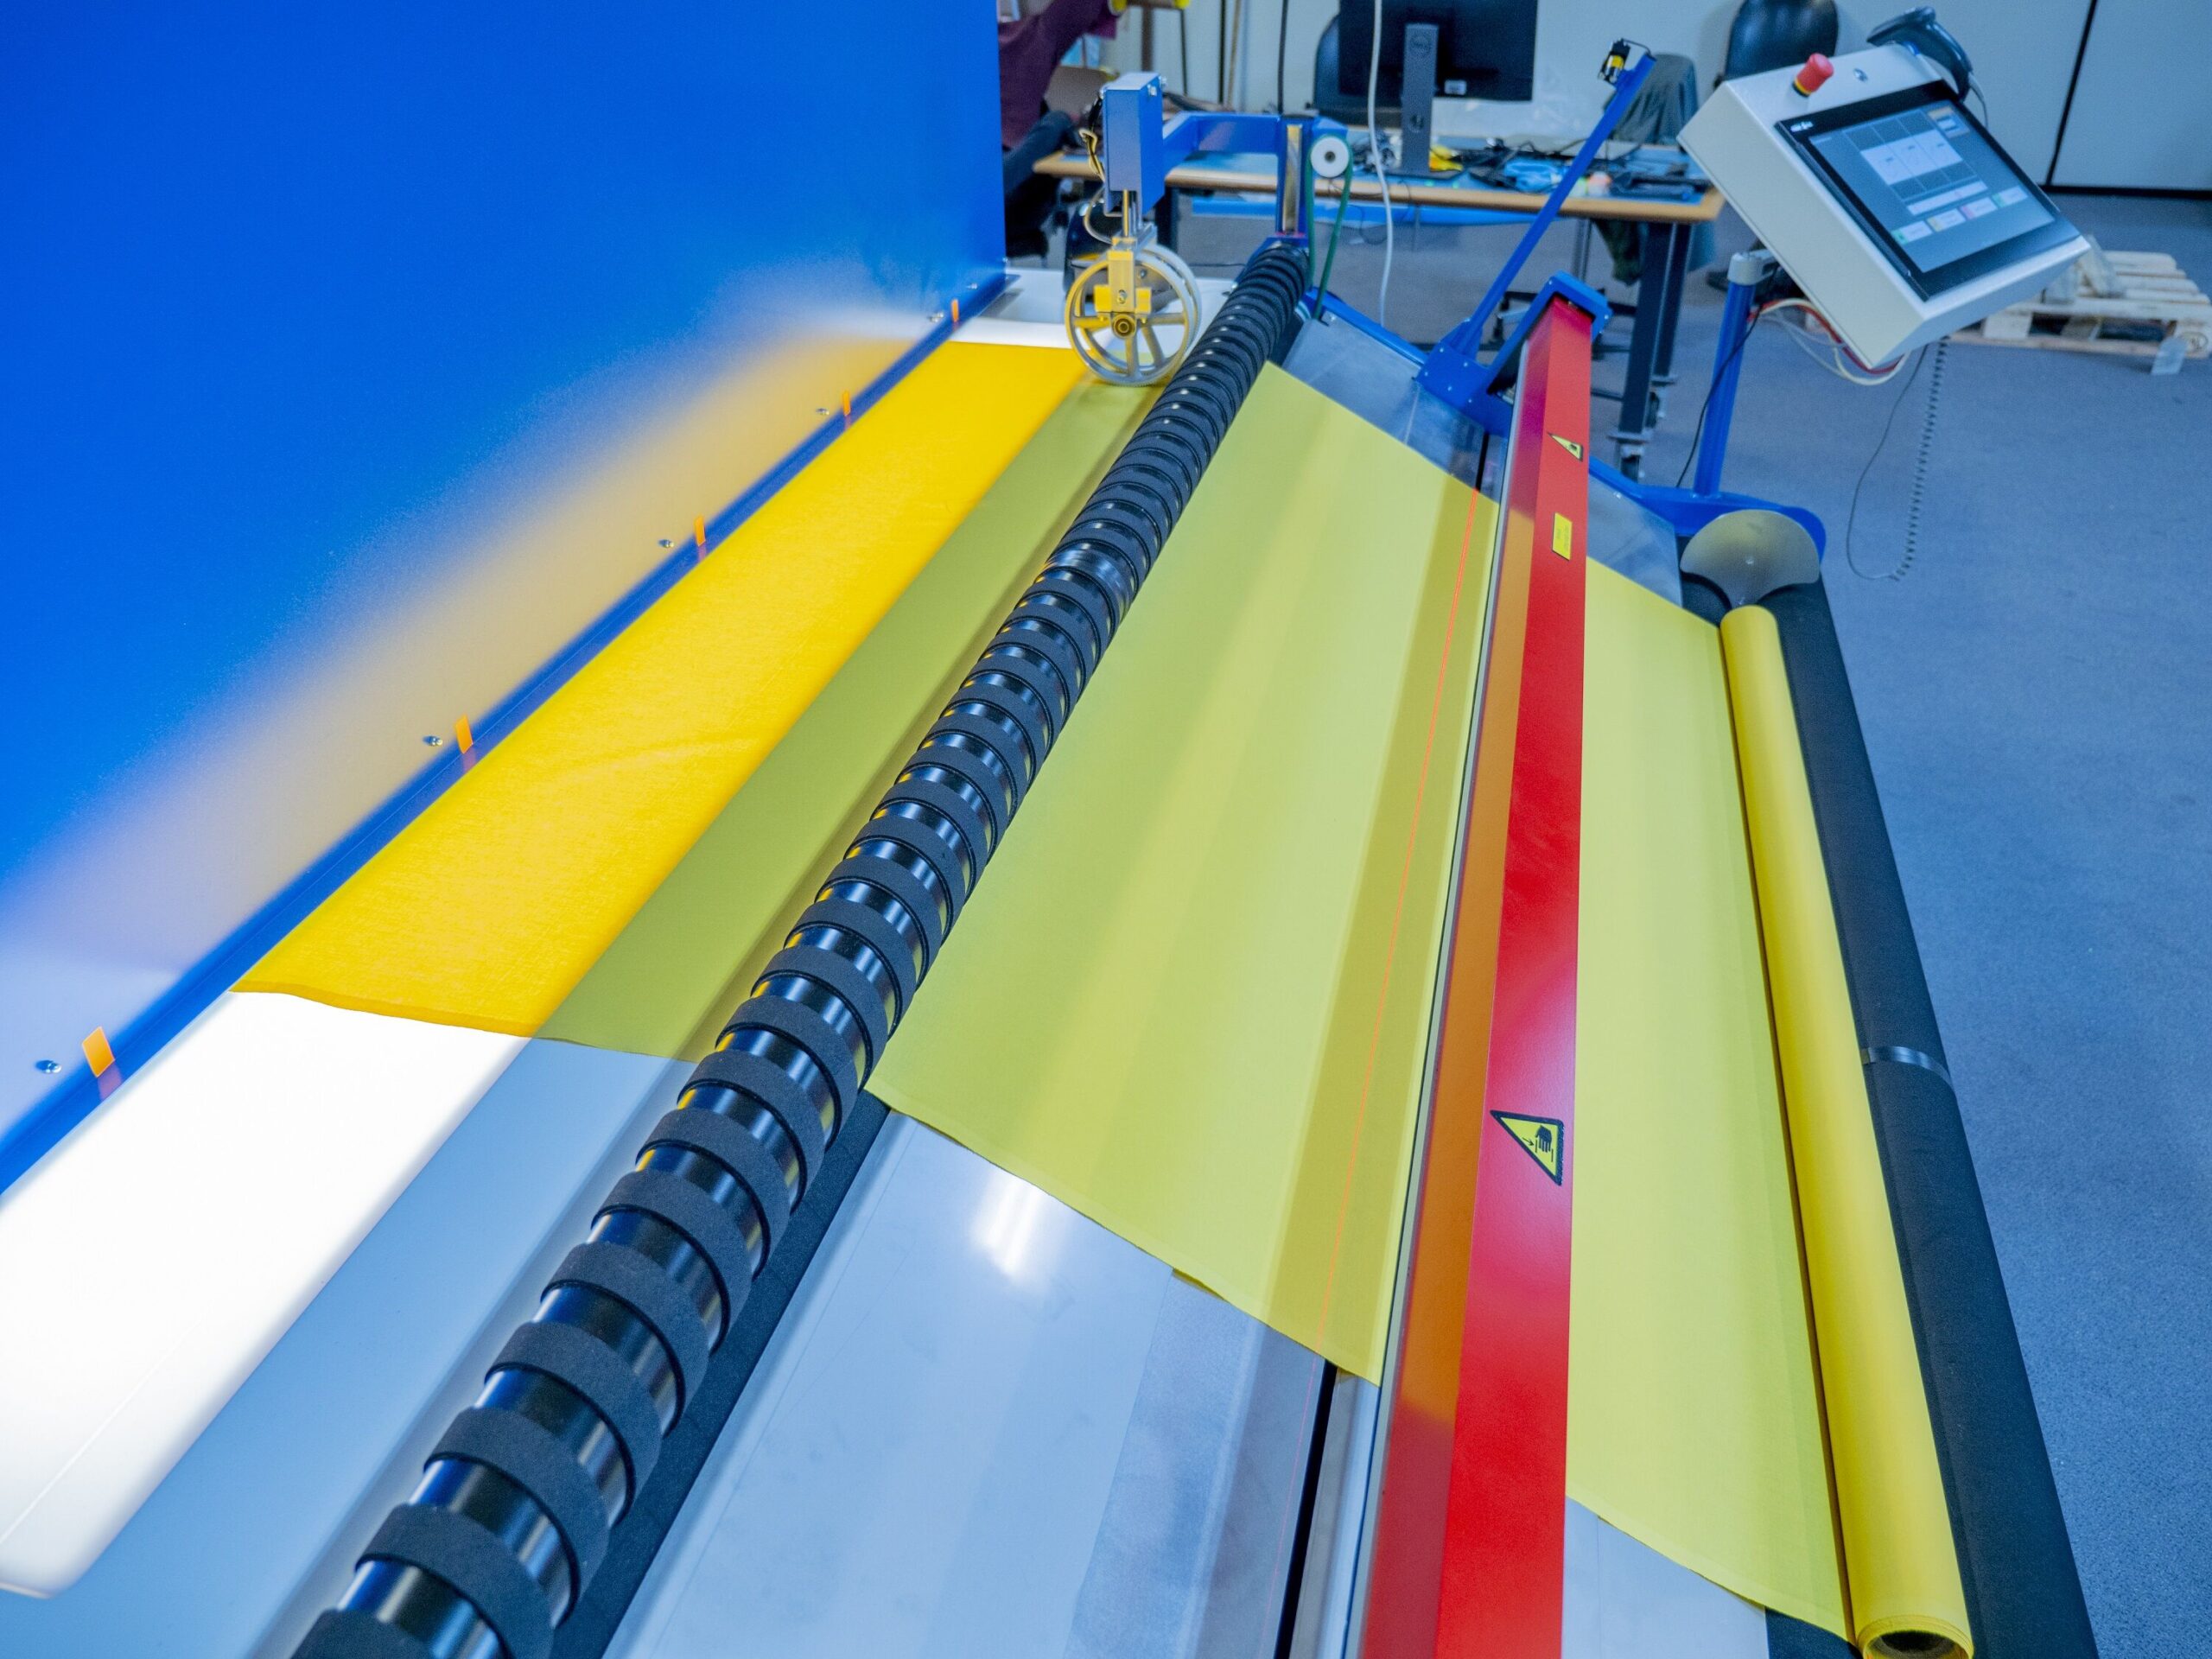 Vadain automates the inspection of curtain fabrics with machine vision